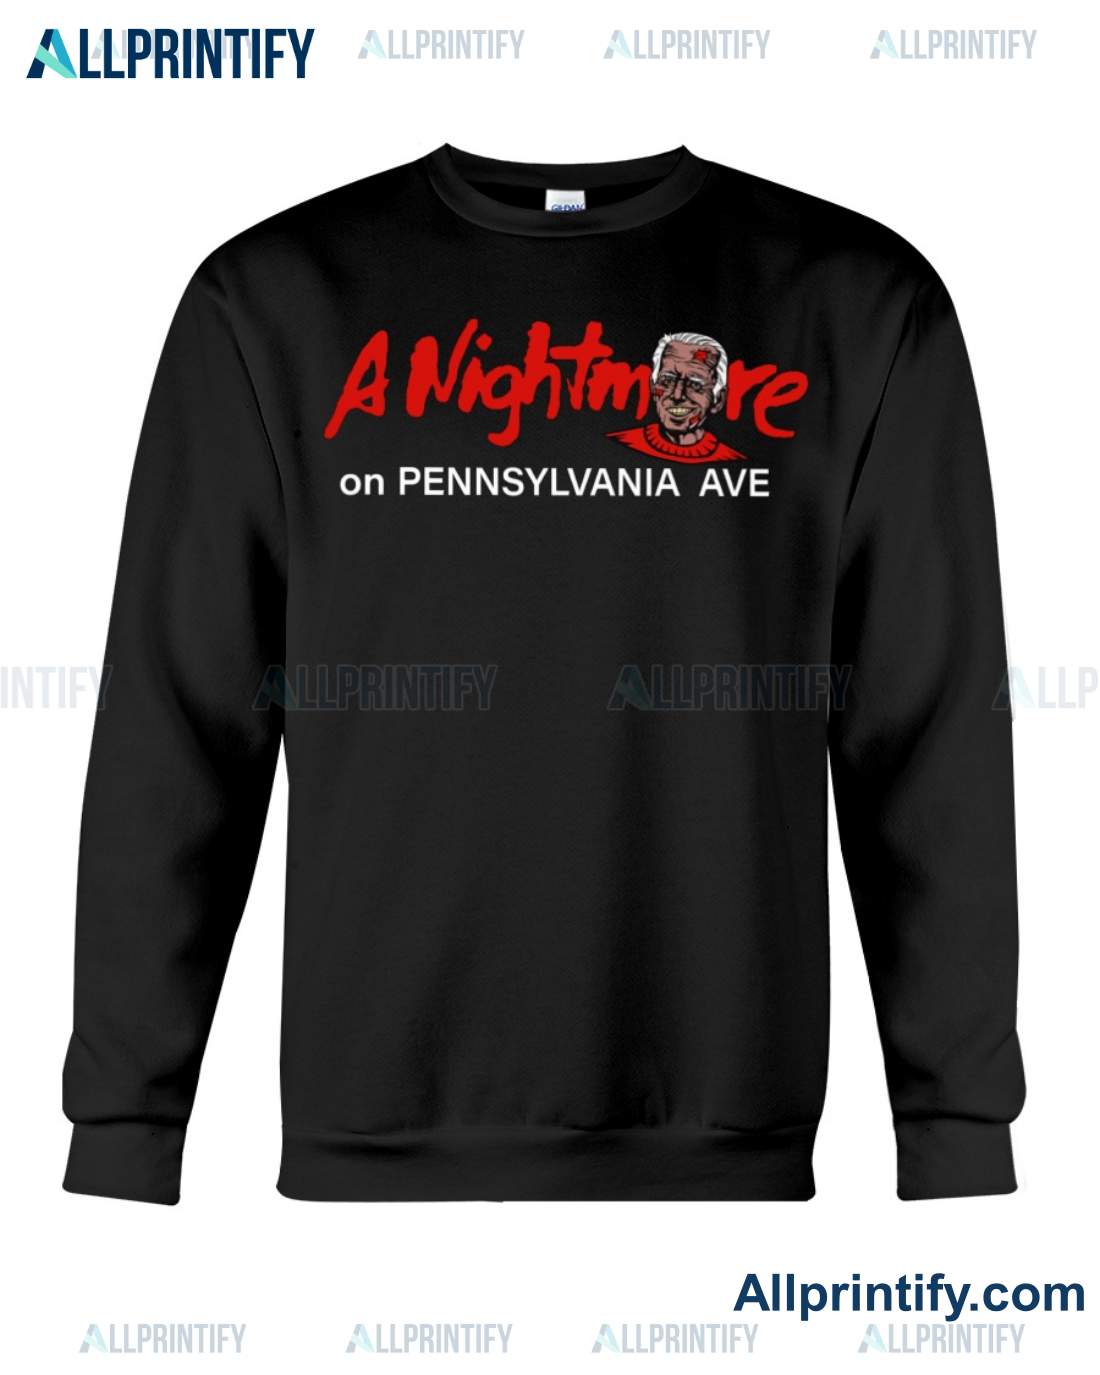 The Officer Tatum Store A Nightmare On Pennsylvania Ave Shirt a